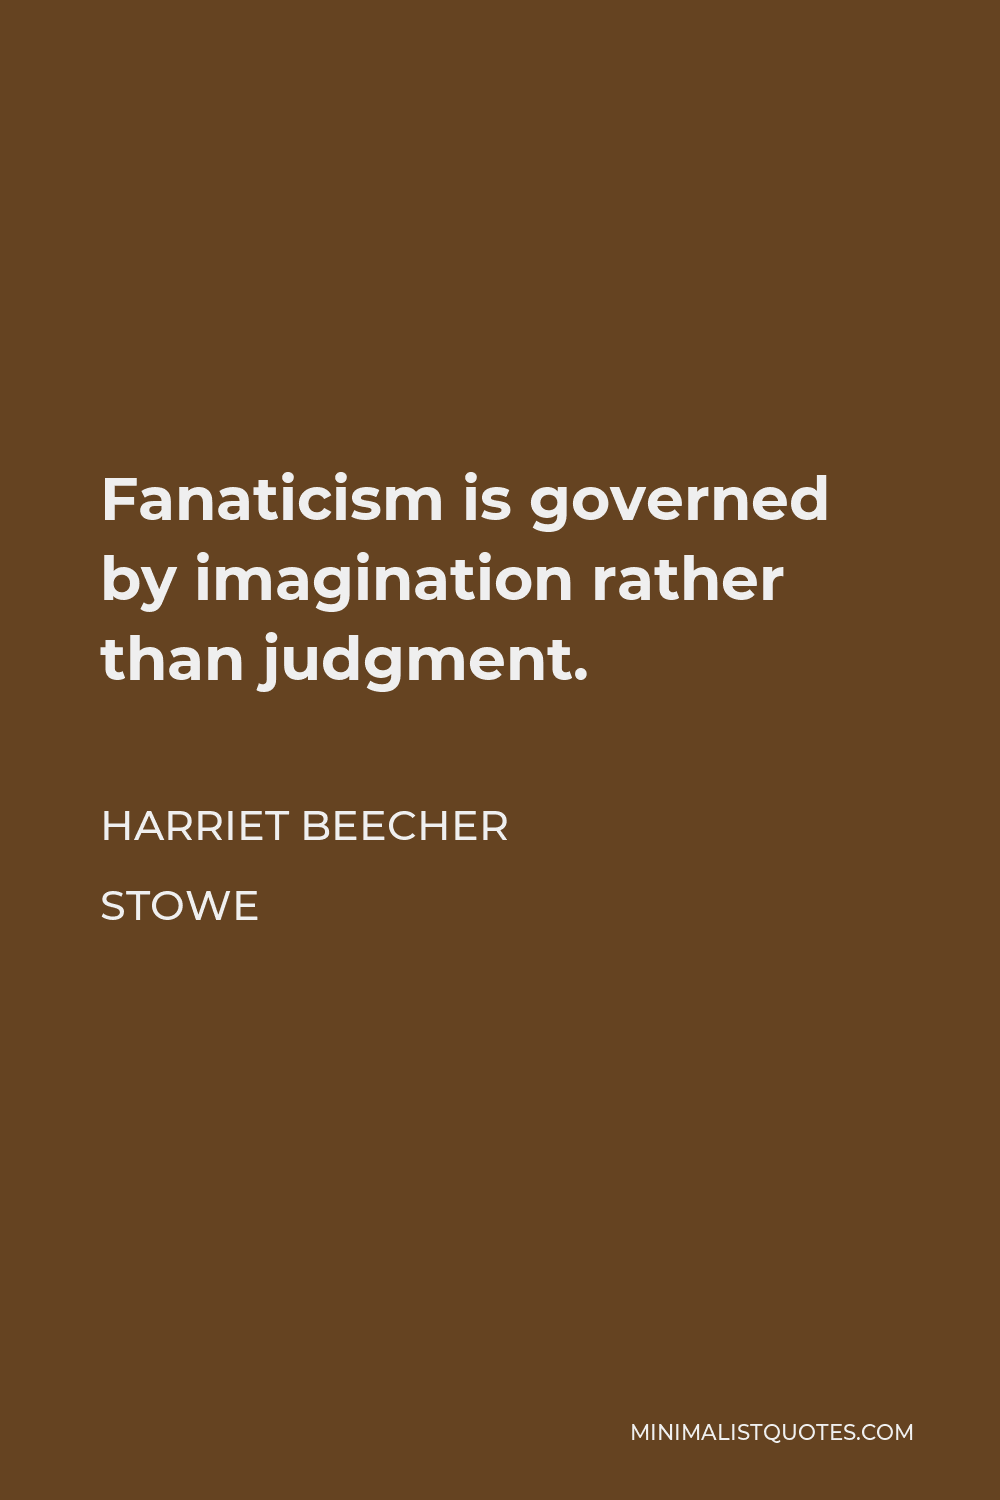 Harriet Beecher Stowe Quote - Fanaticism is governed by imagination rather than judgment.